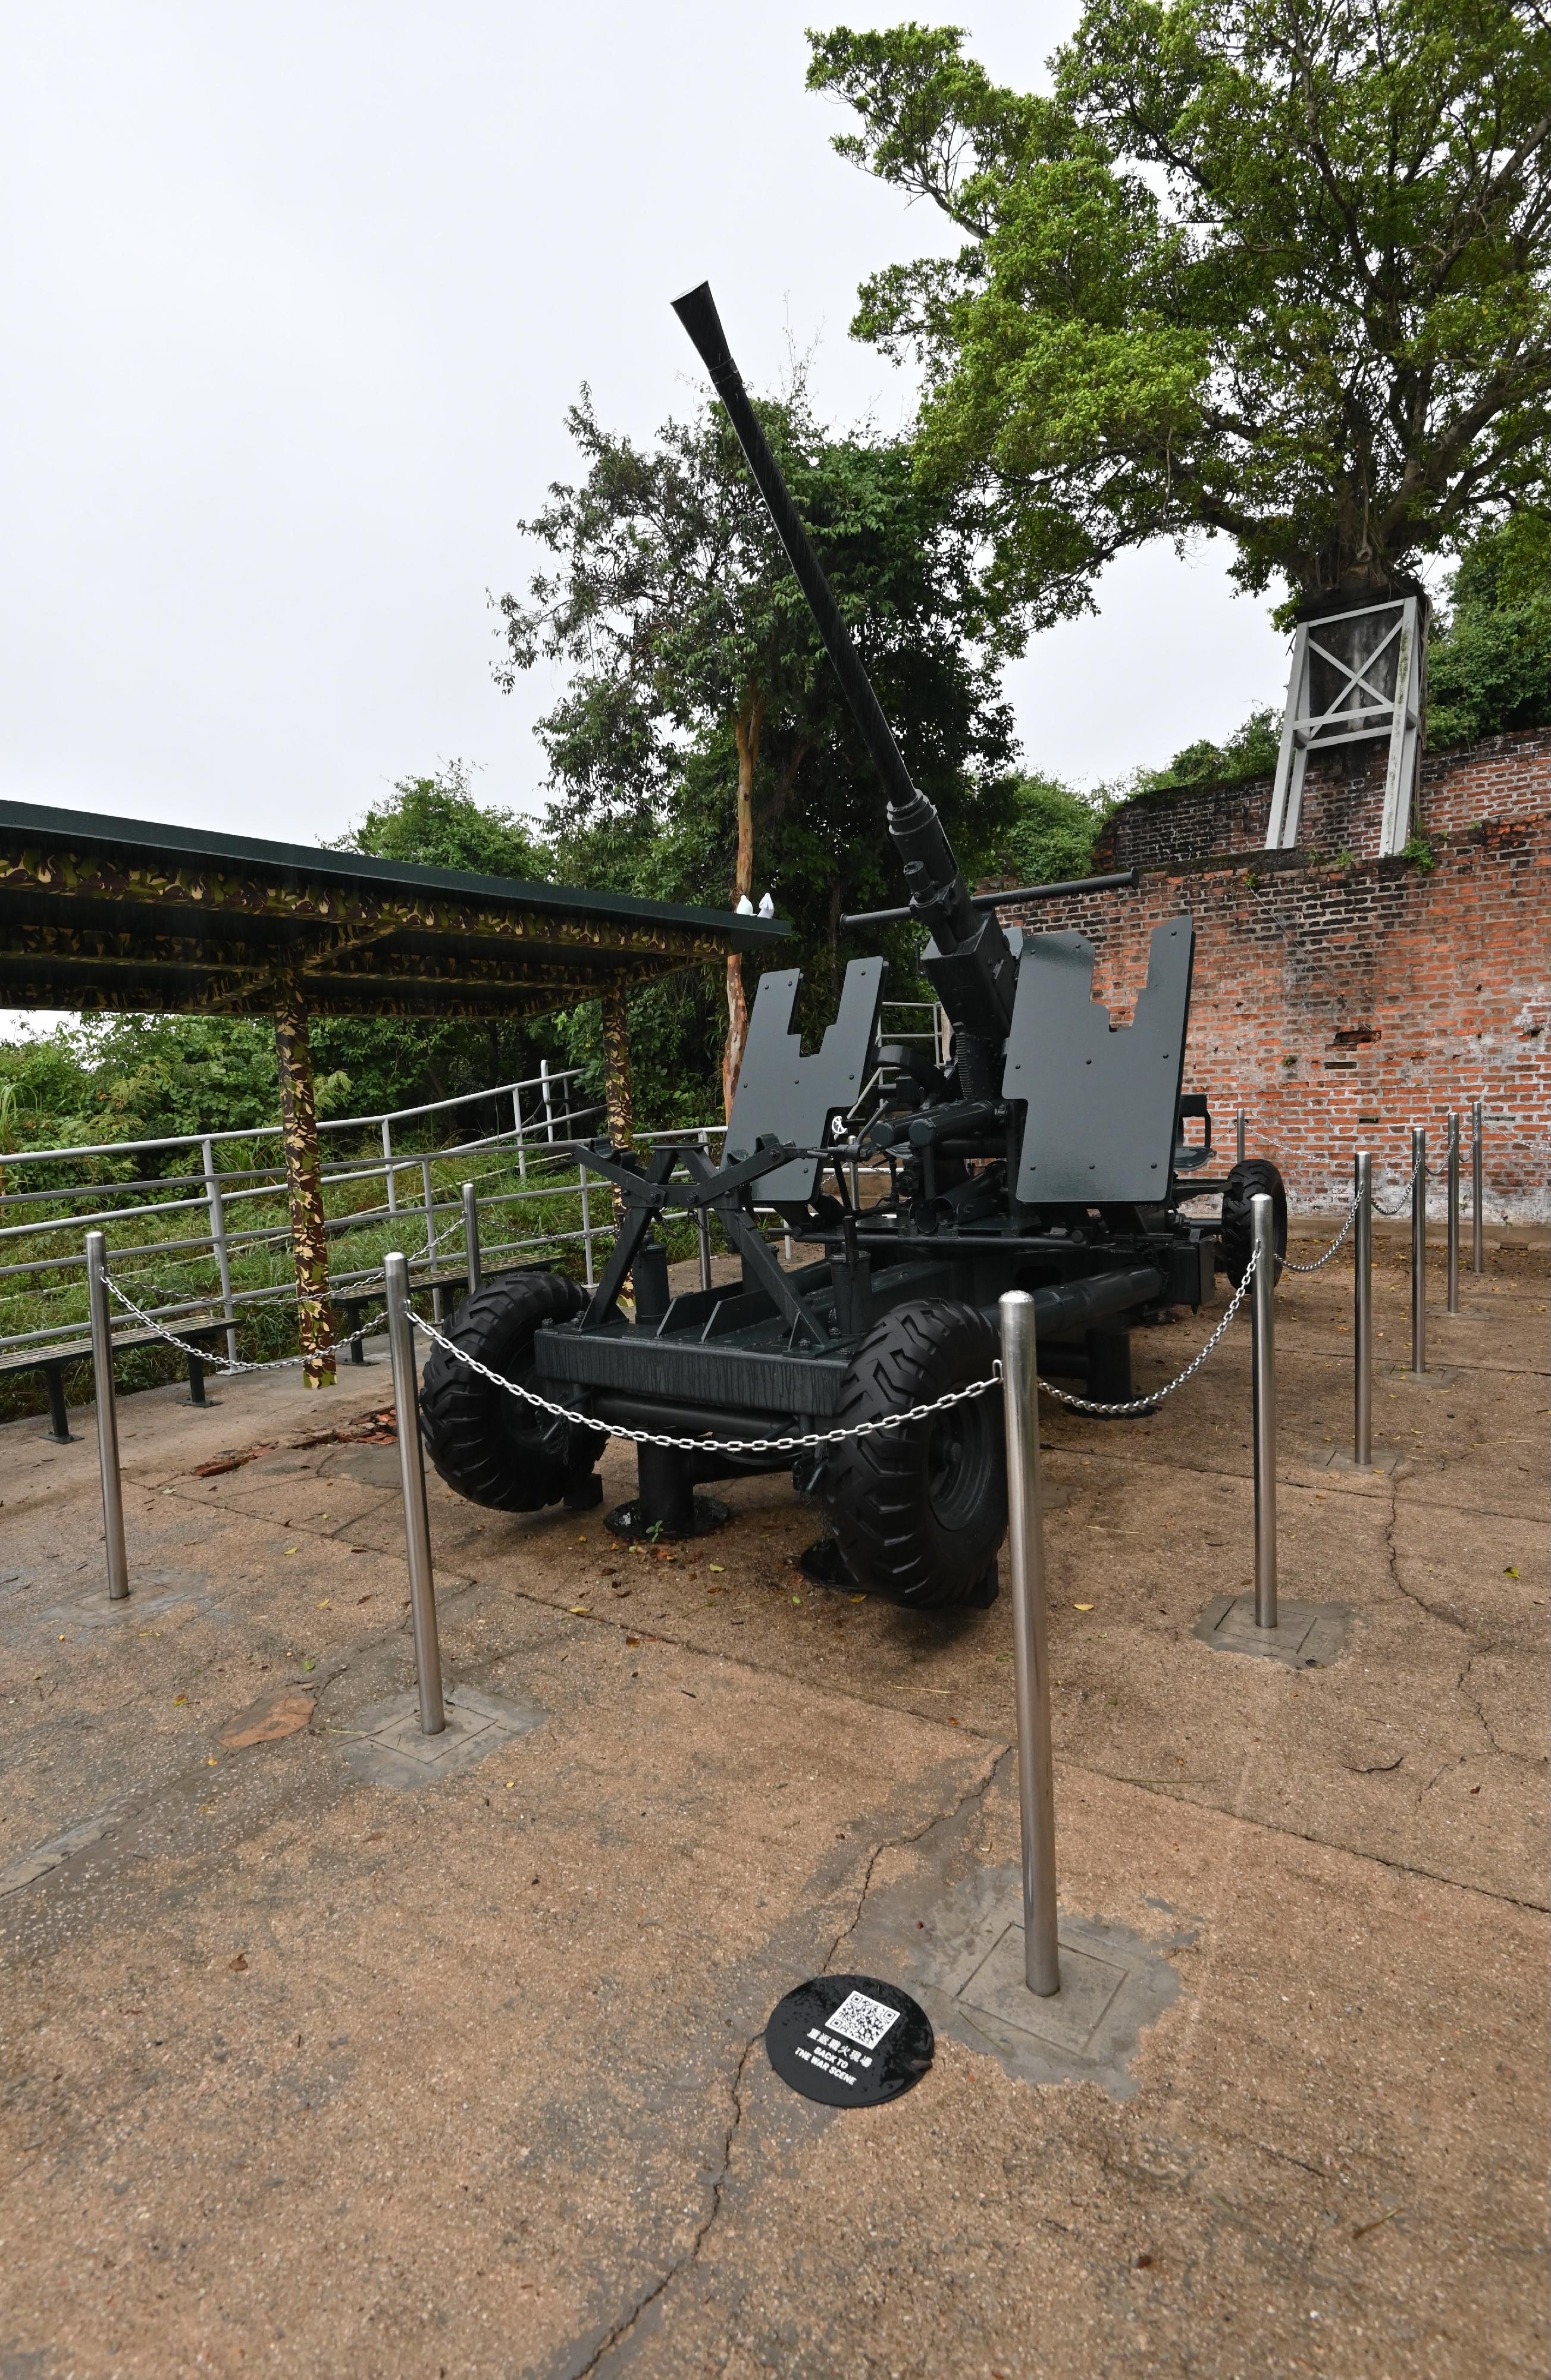 The Hong Kong Museum of Coastal Defence will reopen to the public from tomorrow (November 24). Visitors can obtain more multimedia content about the exhibits through the “iM Guide” mobile app. Picture shows barrack ruins and an anti-aircraft gun on the Lyemun Fort Historical Trail.